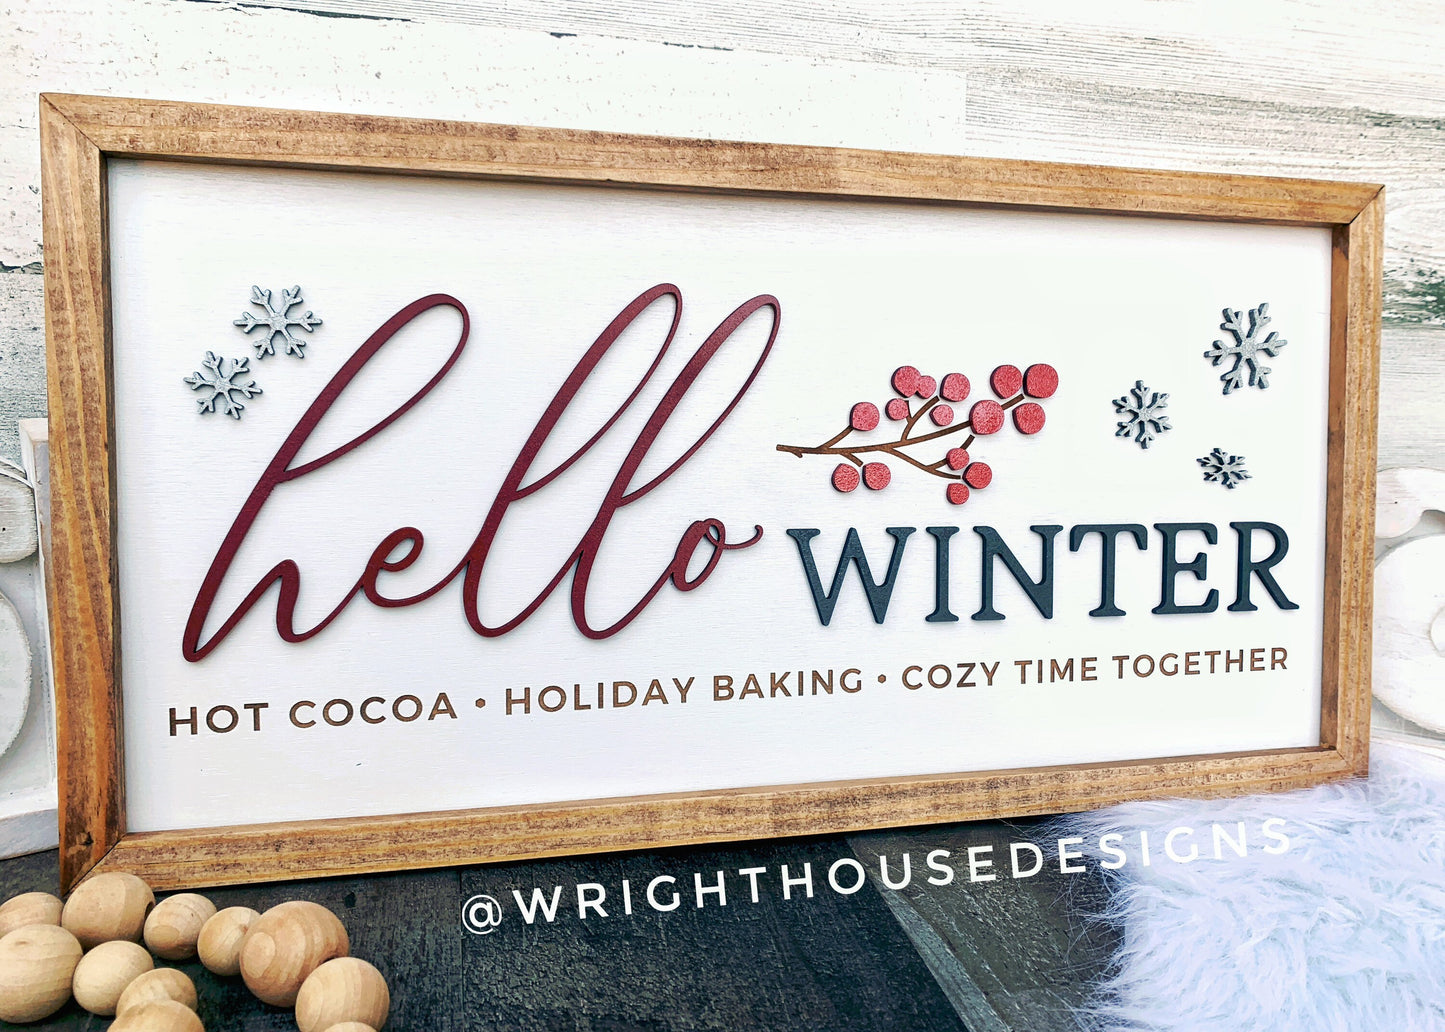 Hello Winter - Festive Yule Coffee Bar Sign - Seasonal Home and Kitchen Decor - Winter Cottagecore - Framed Wall Art - Holiday Decorations